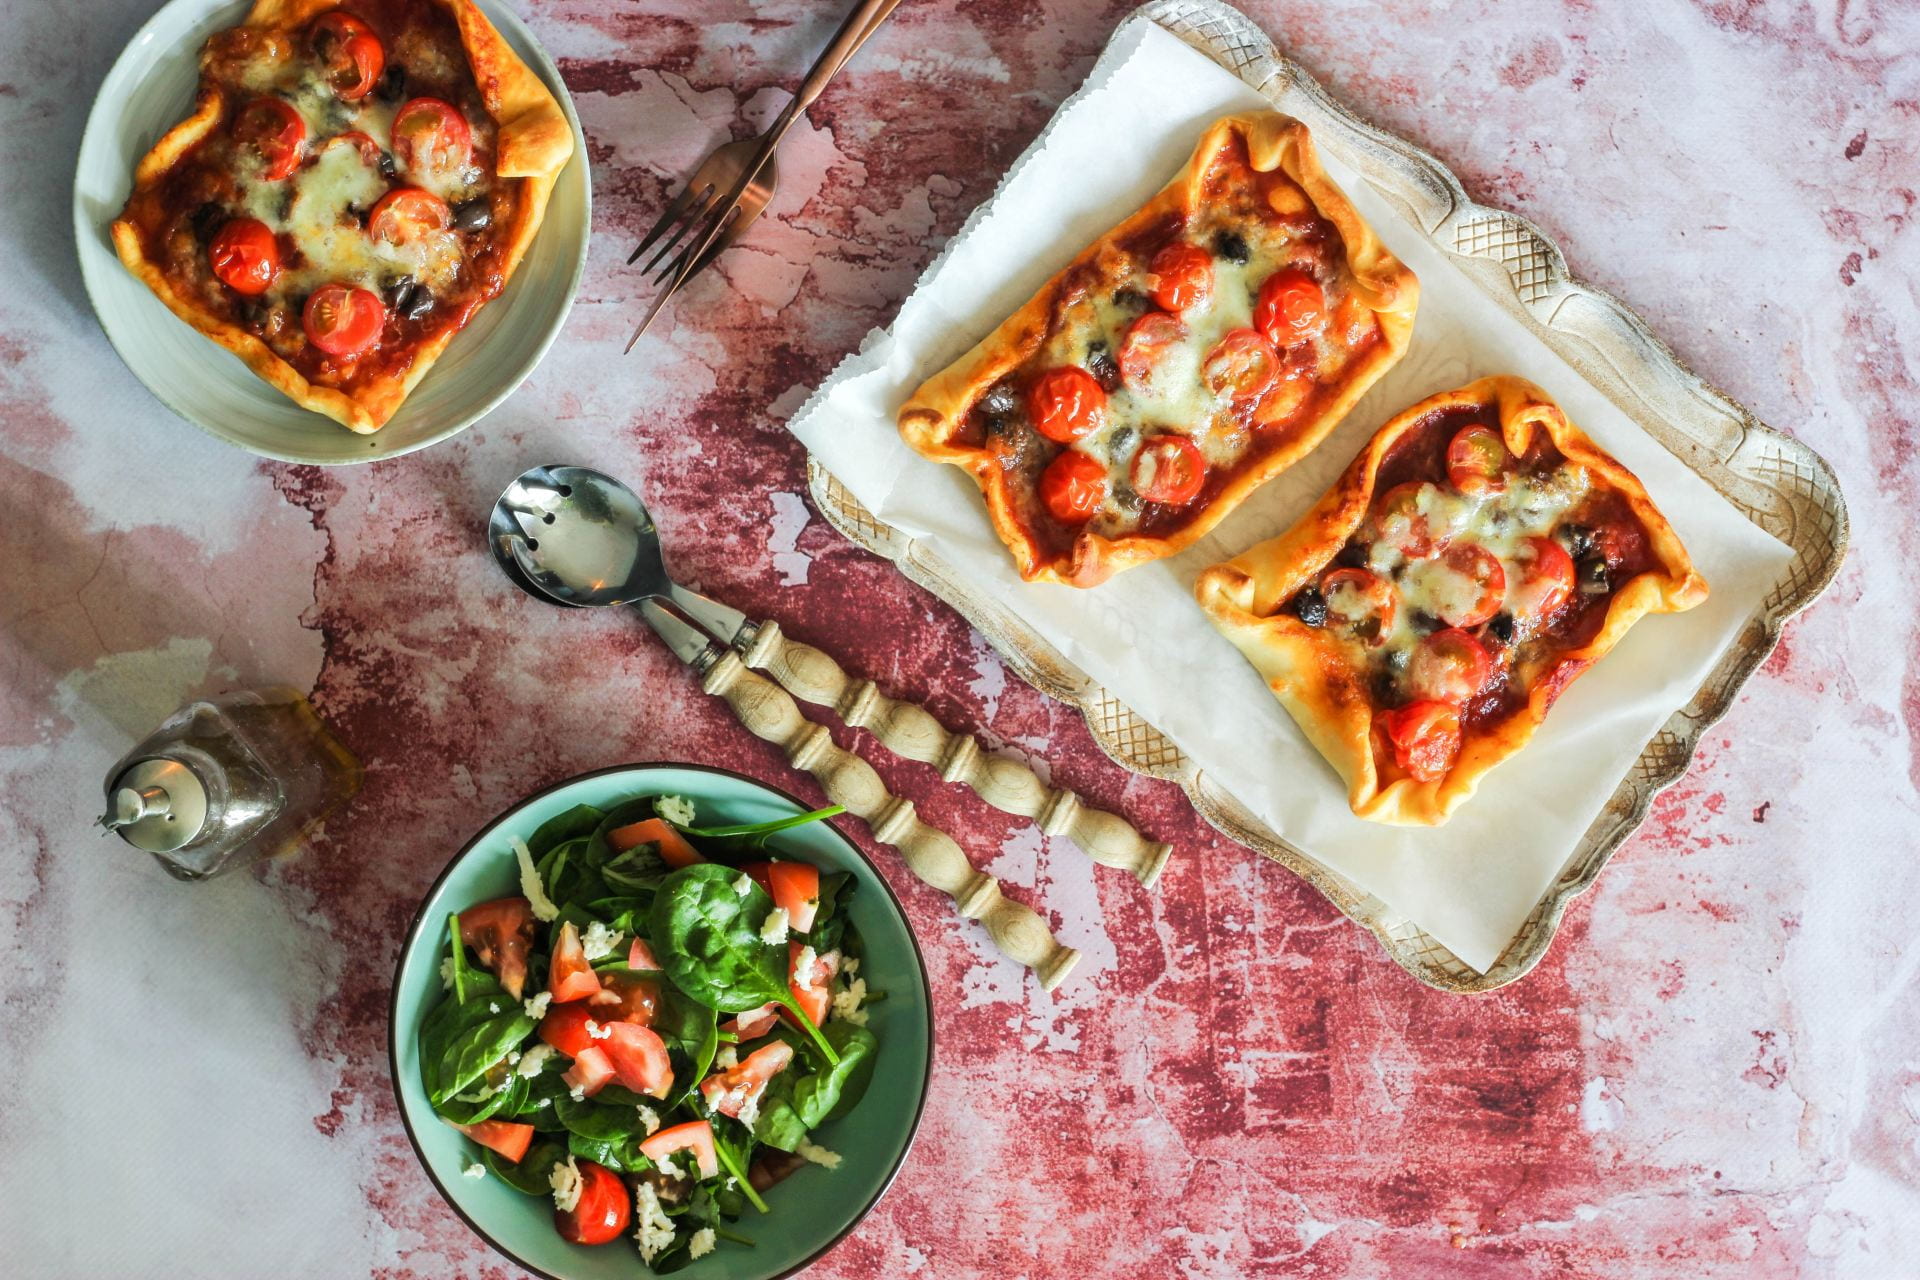 Home made pizza slices with a salad
